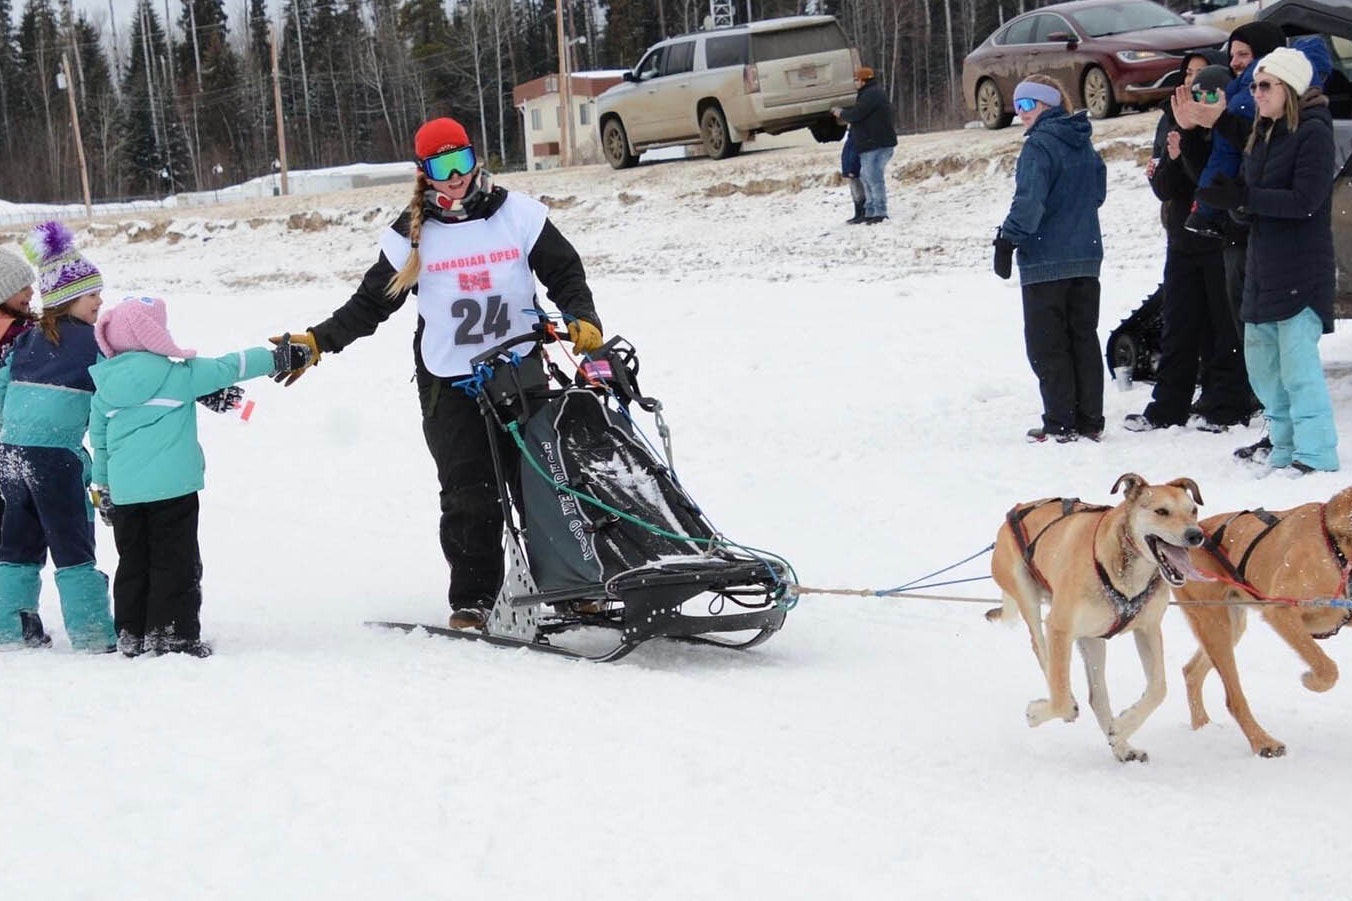 Jess Moore runs the Canadian Open in Fort Nelson, British Columbia, last April. Now the Jackson rookie will run in one of the most prestigious sled dog races in North America.